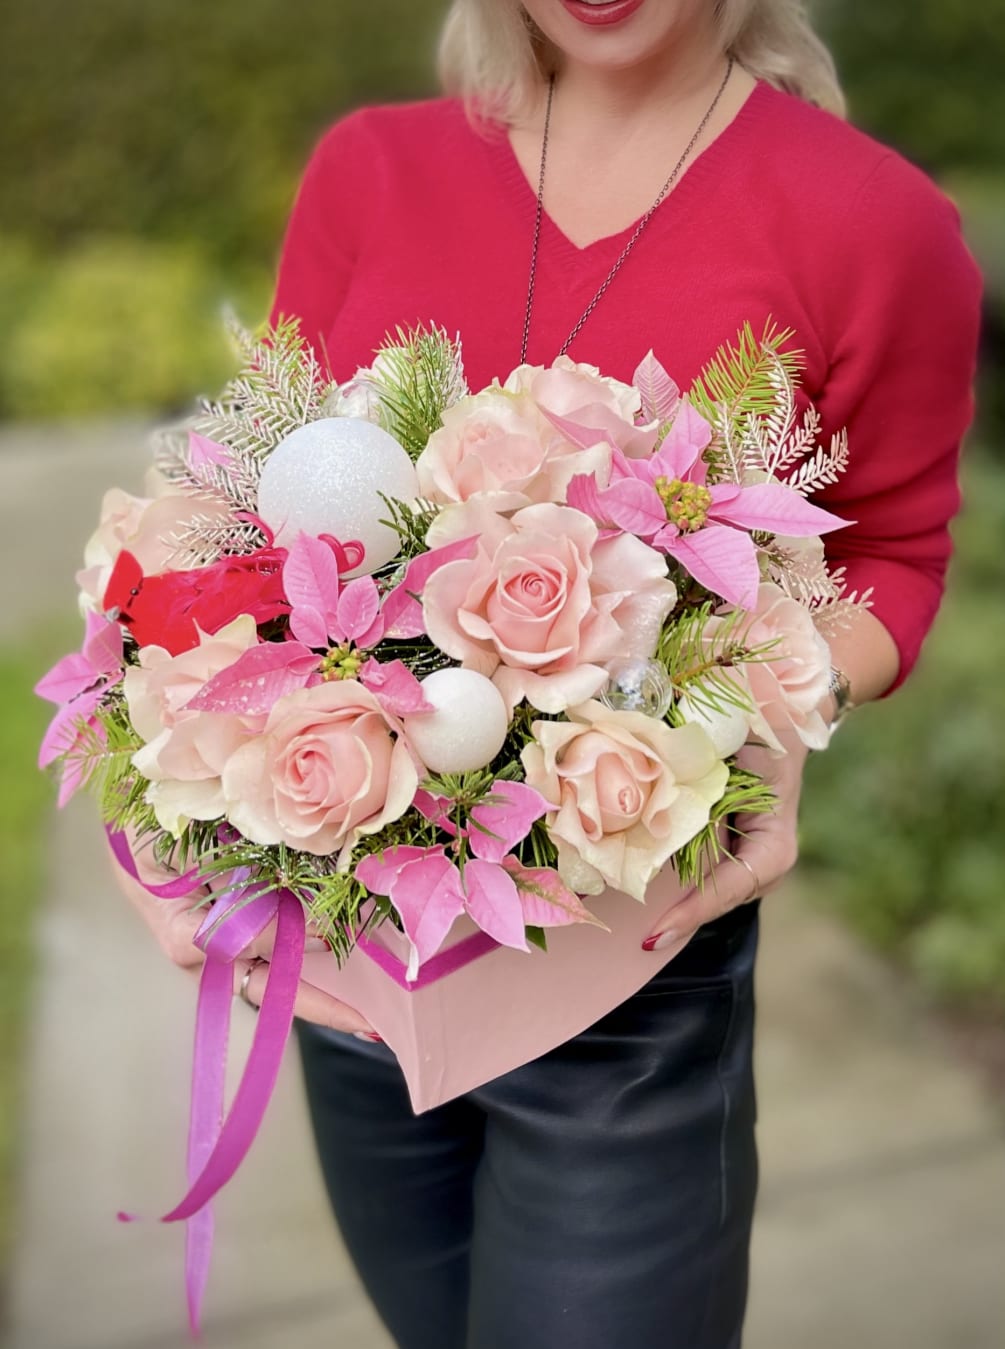 Nestled in a captivating heart-shaped box, this enchanting arrangement is a perfect